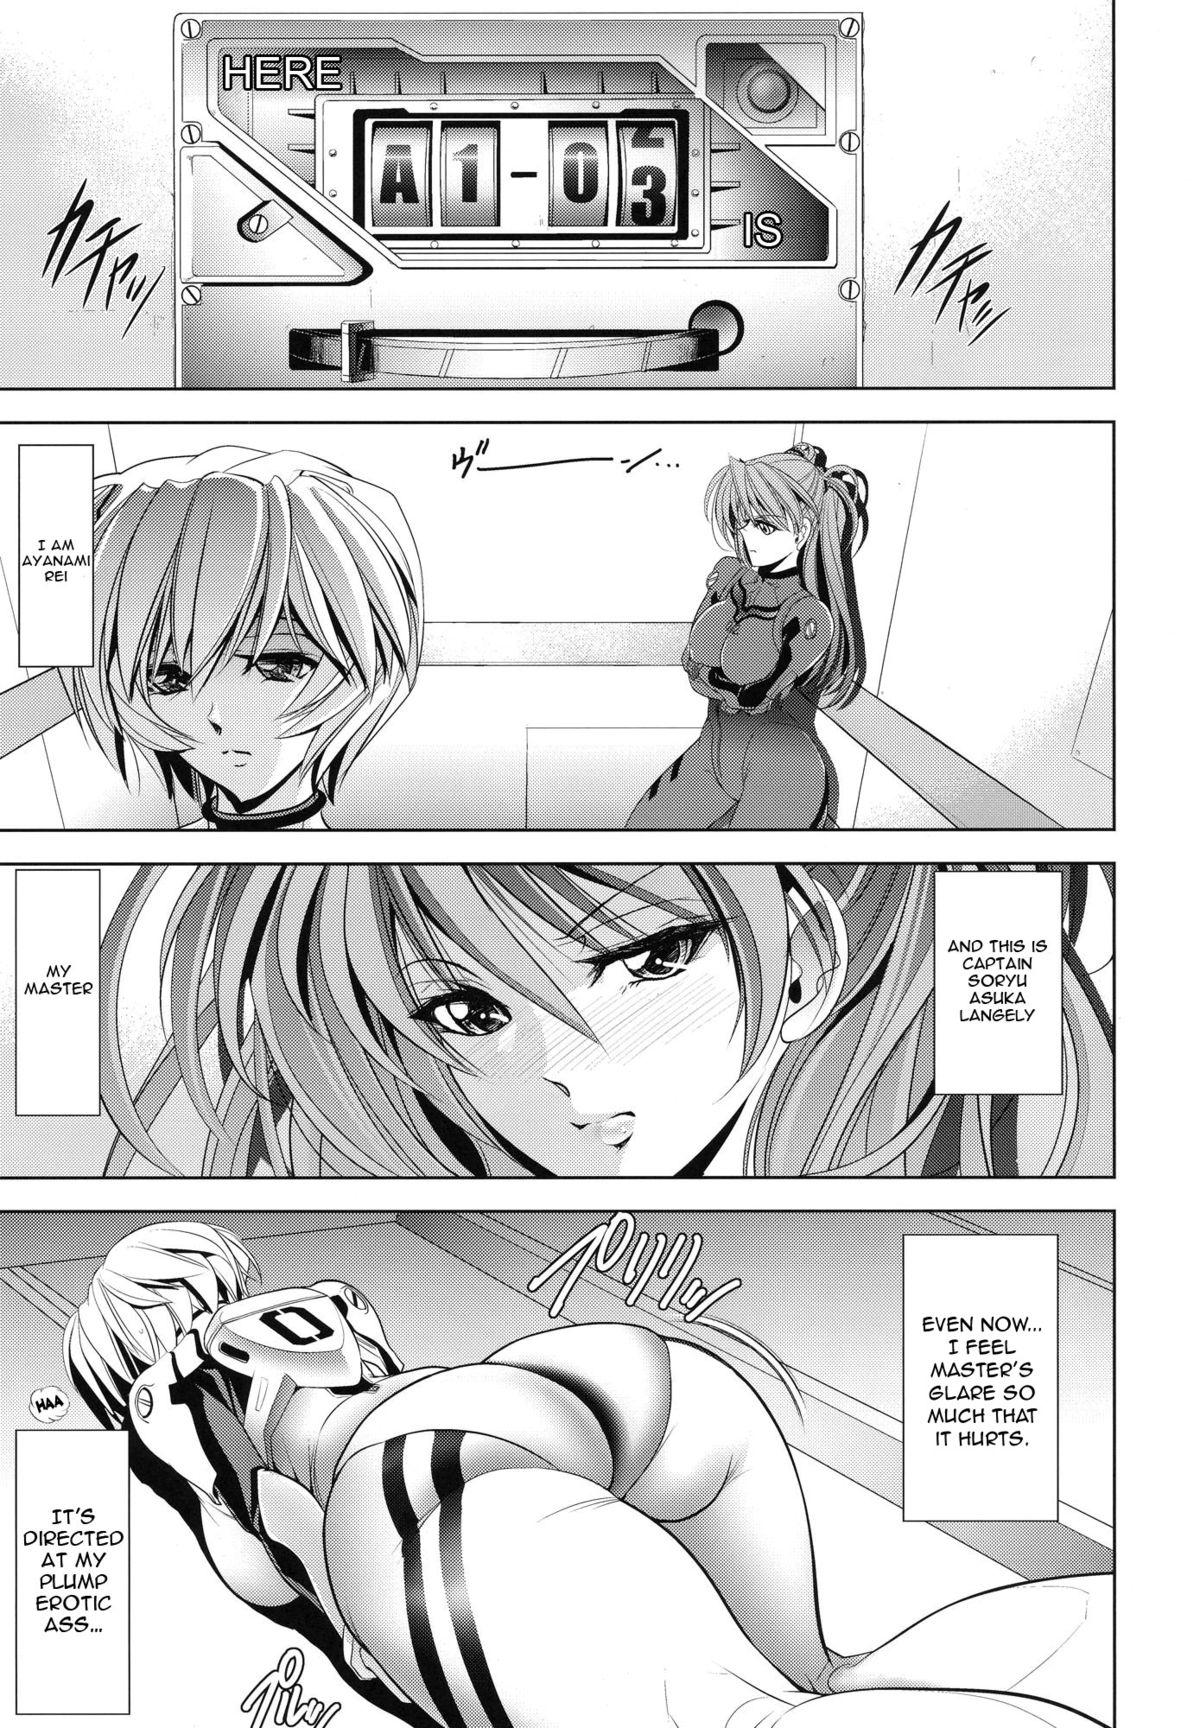 Sapphic Princess and the Slave - Neon genesis evangelion Les - Page 4